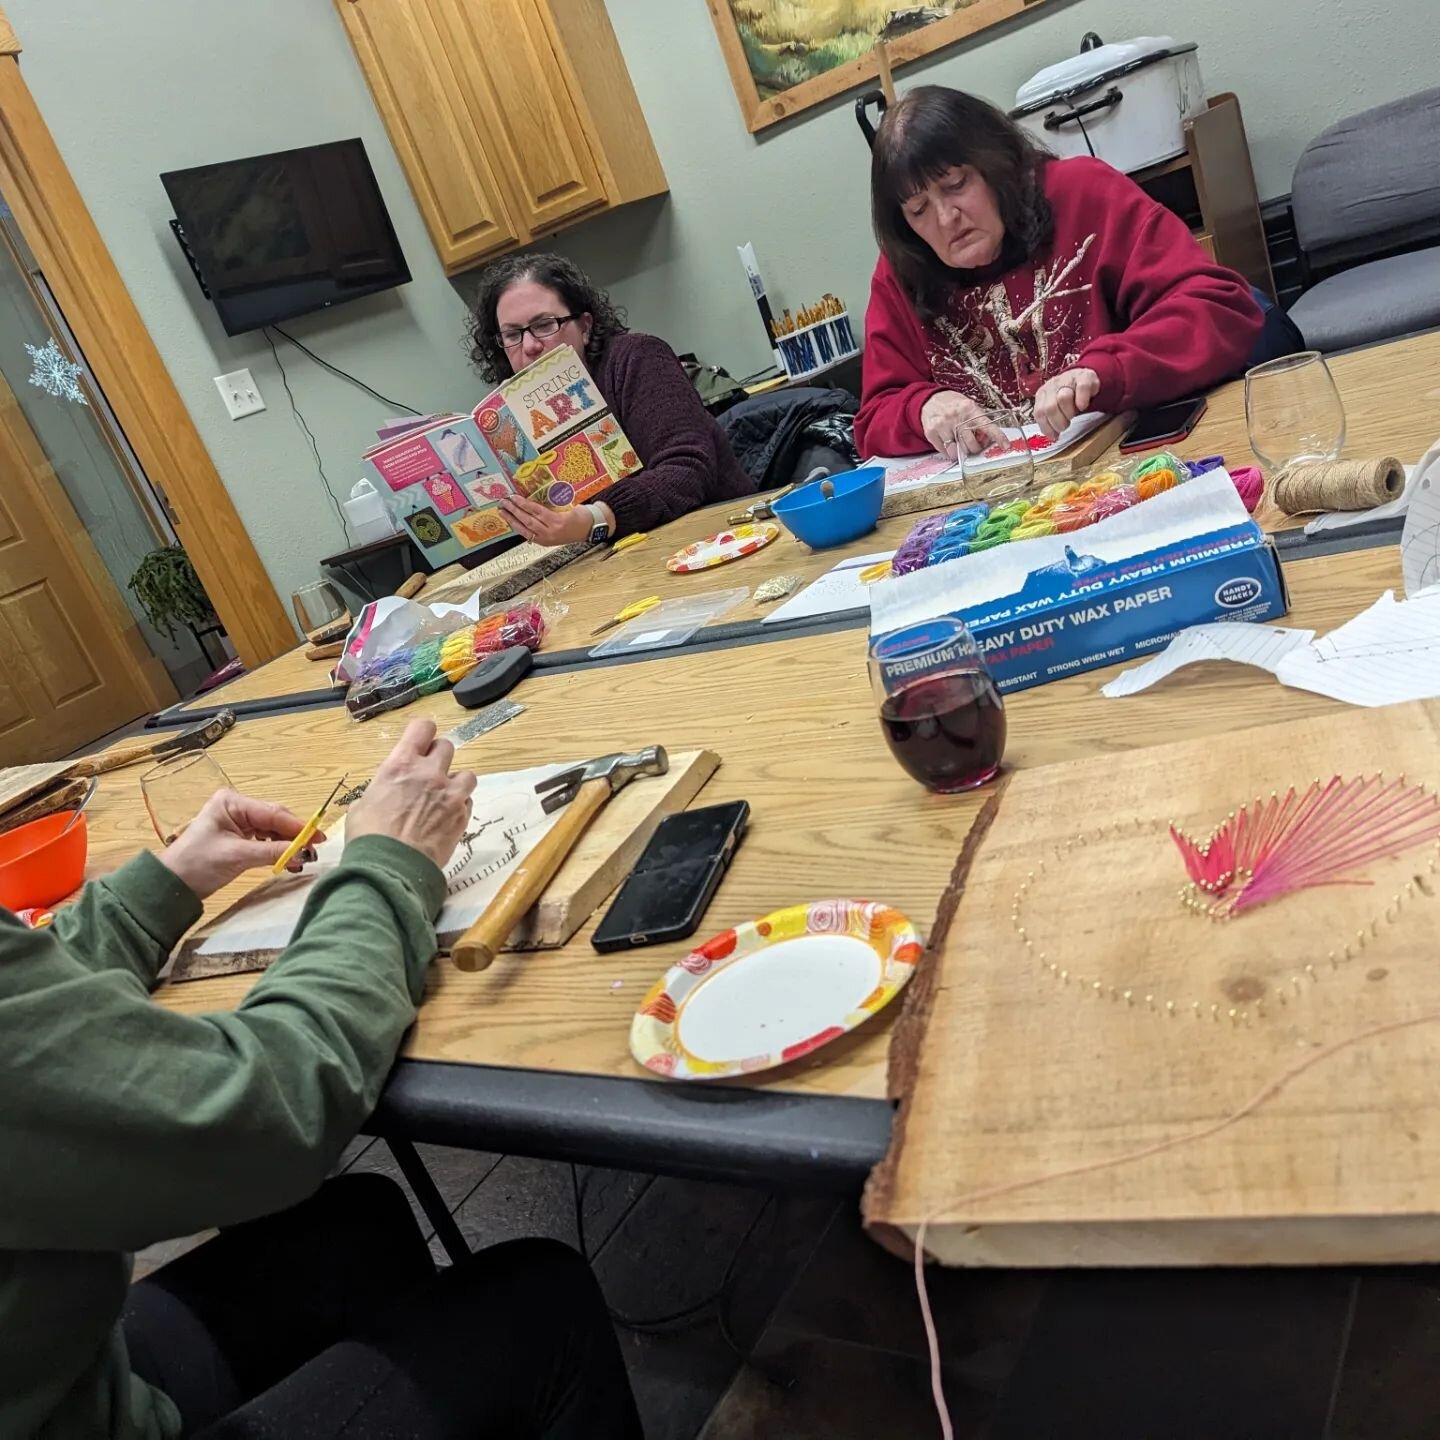 String Art was the Crafterhours theme of February. Next one will be March 15 &quot;Friyay&quot; 5:00pm,  theme mushrooms. Just wait and see. 
#librarieshavemorethanbooks #Crafterhours
#librariesrock #librariesofwisconsin